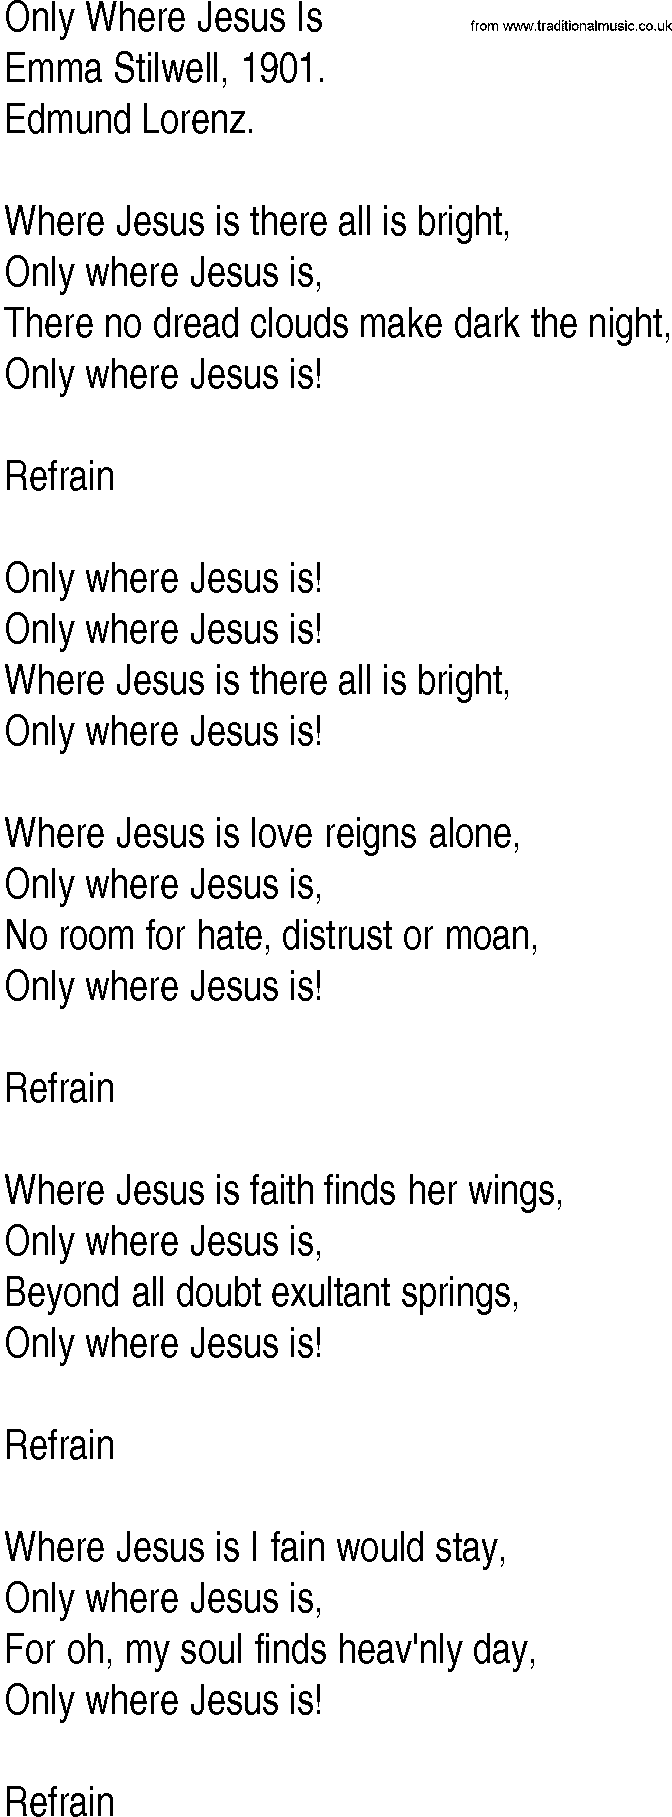 Hymn and Gospel Song: Only Where Jesus Is by Emma Stilwell lyrics